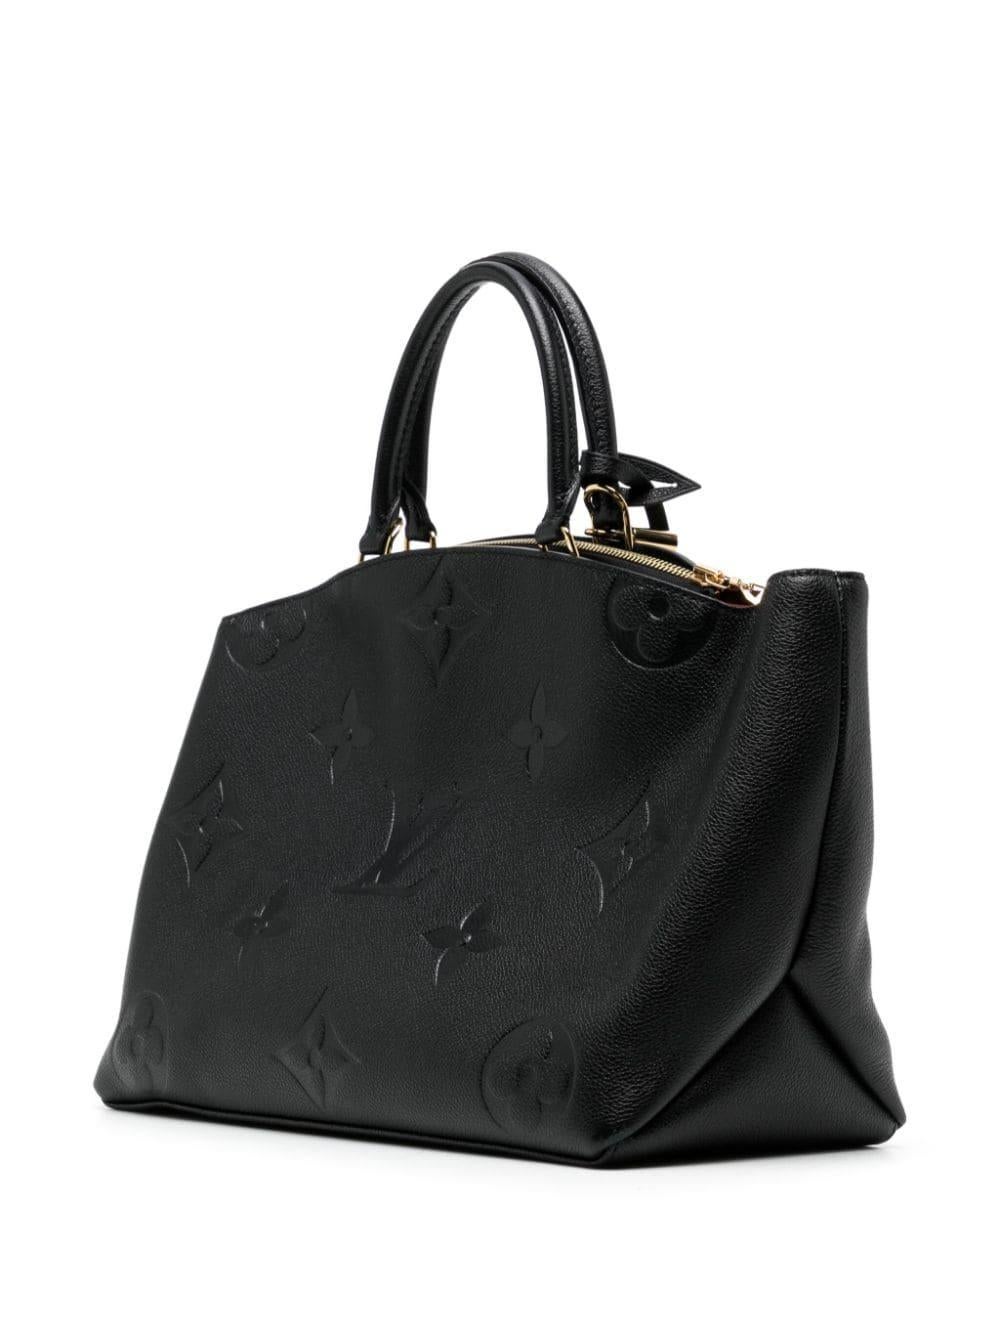 * Black
* Empreinte leather
* All-over debossed logo print
* Two rolled top handles
* Detachable shoulder strap
* Top zip fastening
* Main compartment
* Internal zip-fastening pocket
* Multiple internal slip pockets
* Gold-tone hardware
* Excellent